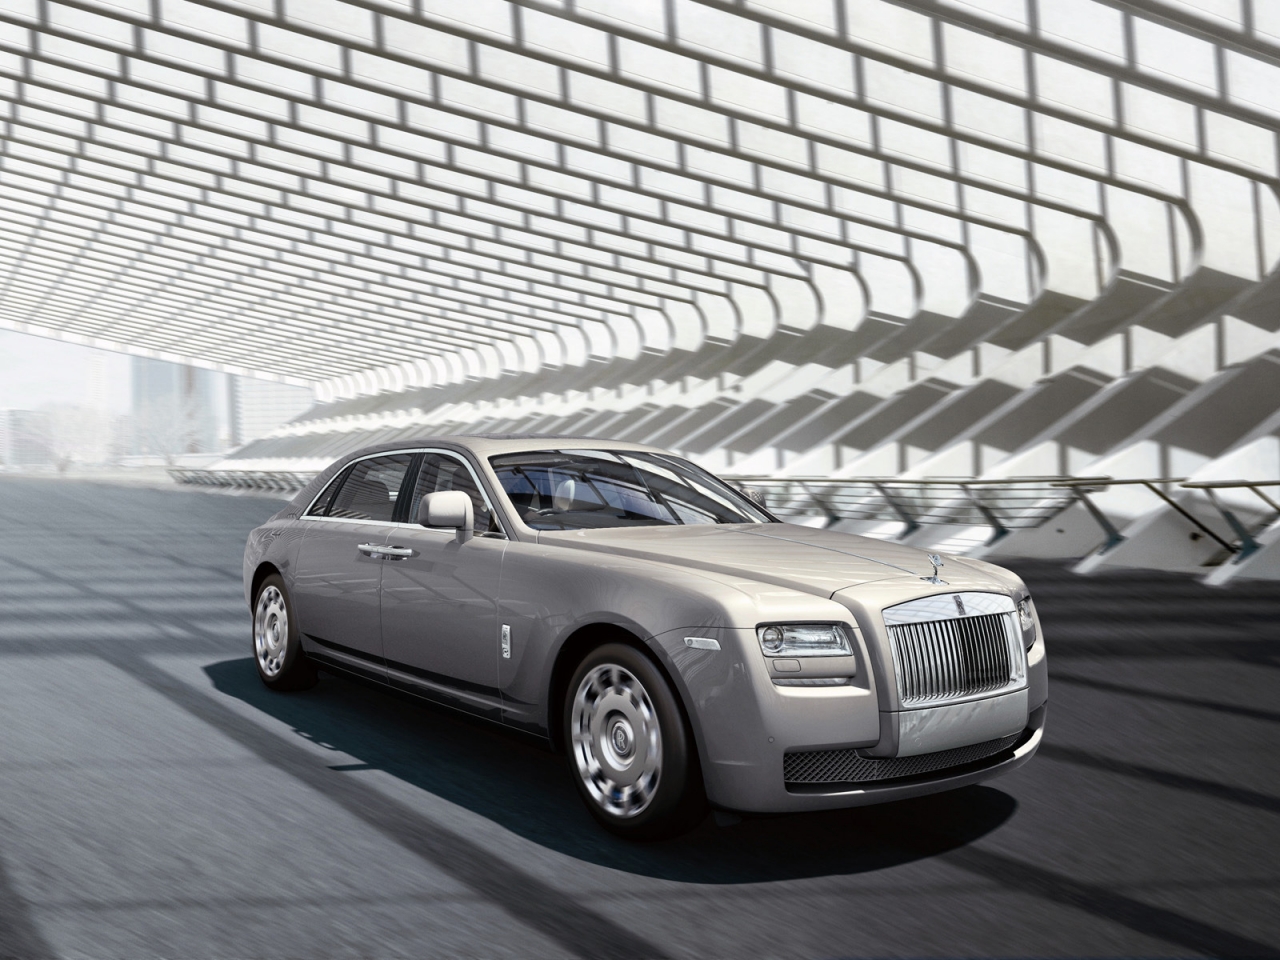 2011 Rolls Royce Ghost for 1280 x 960 resolution